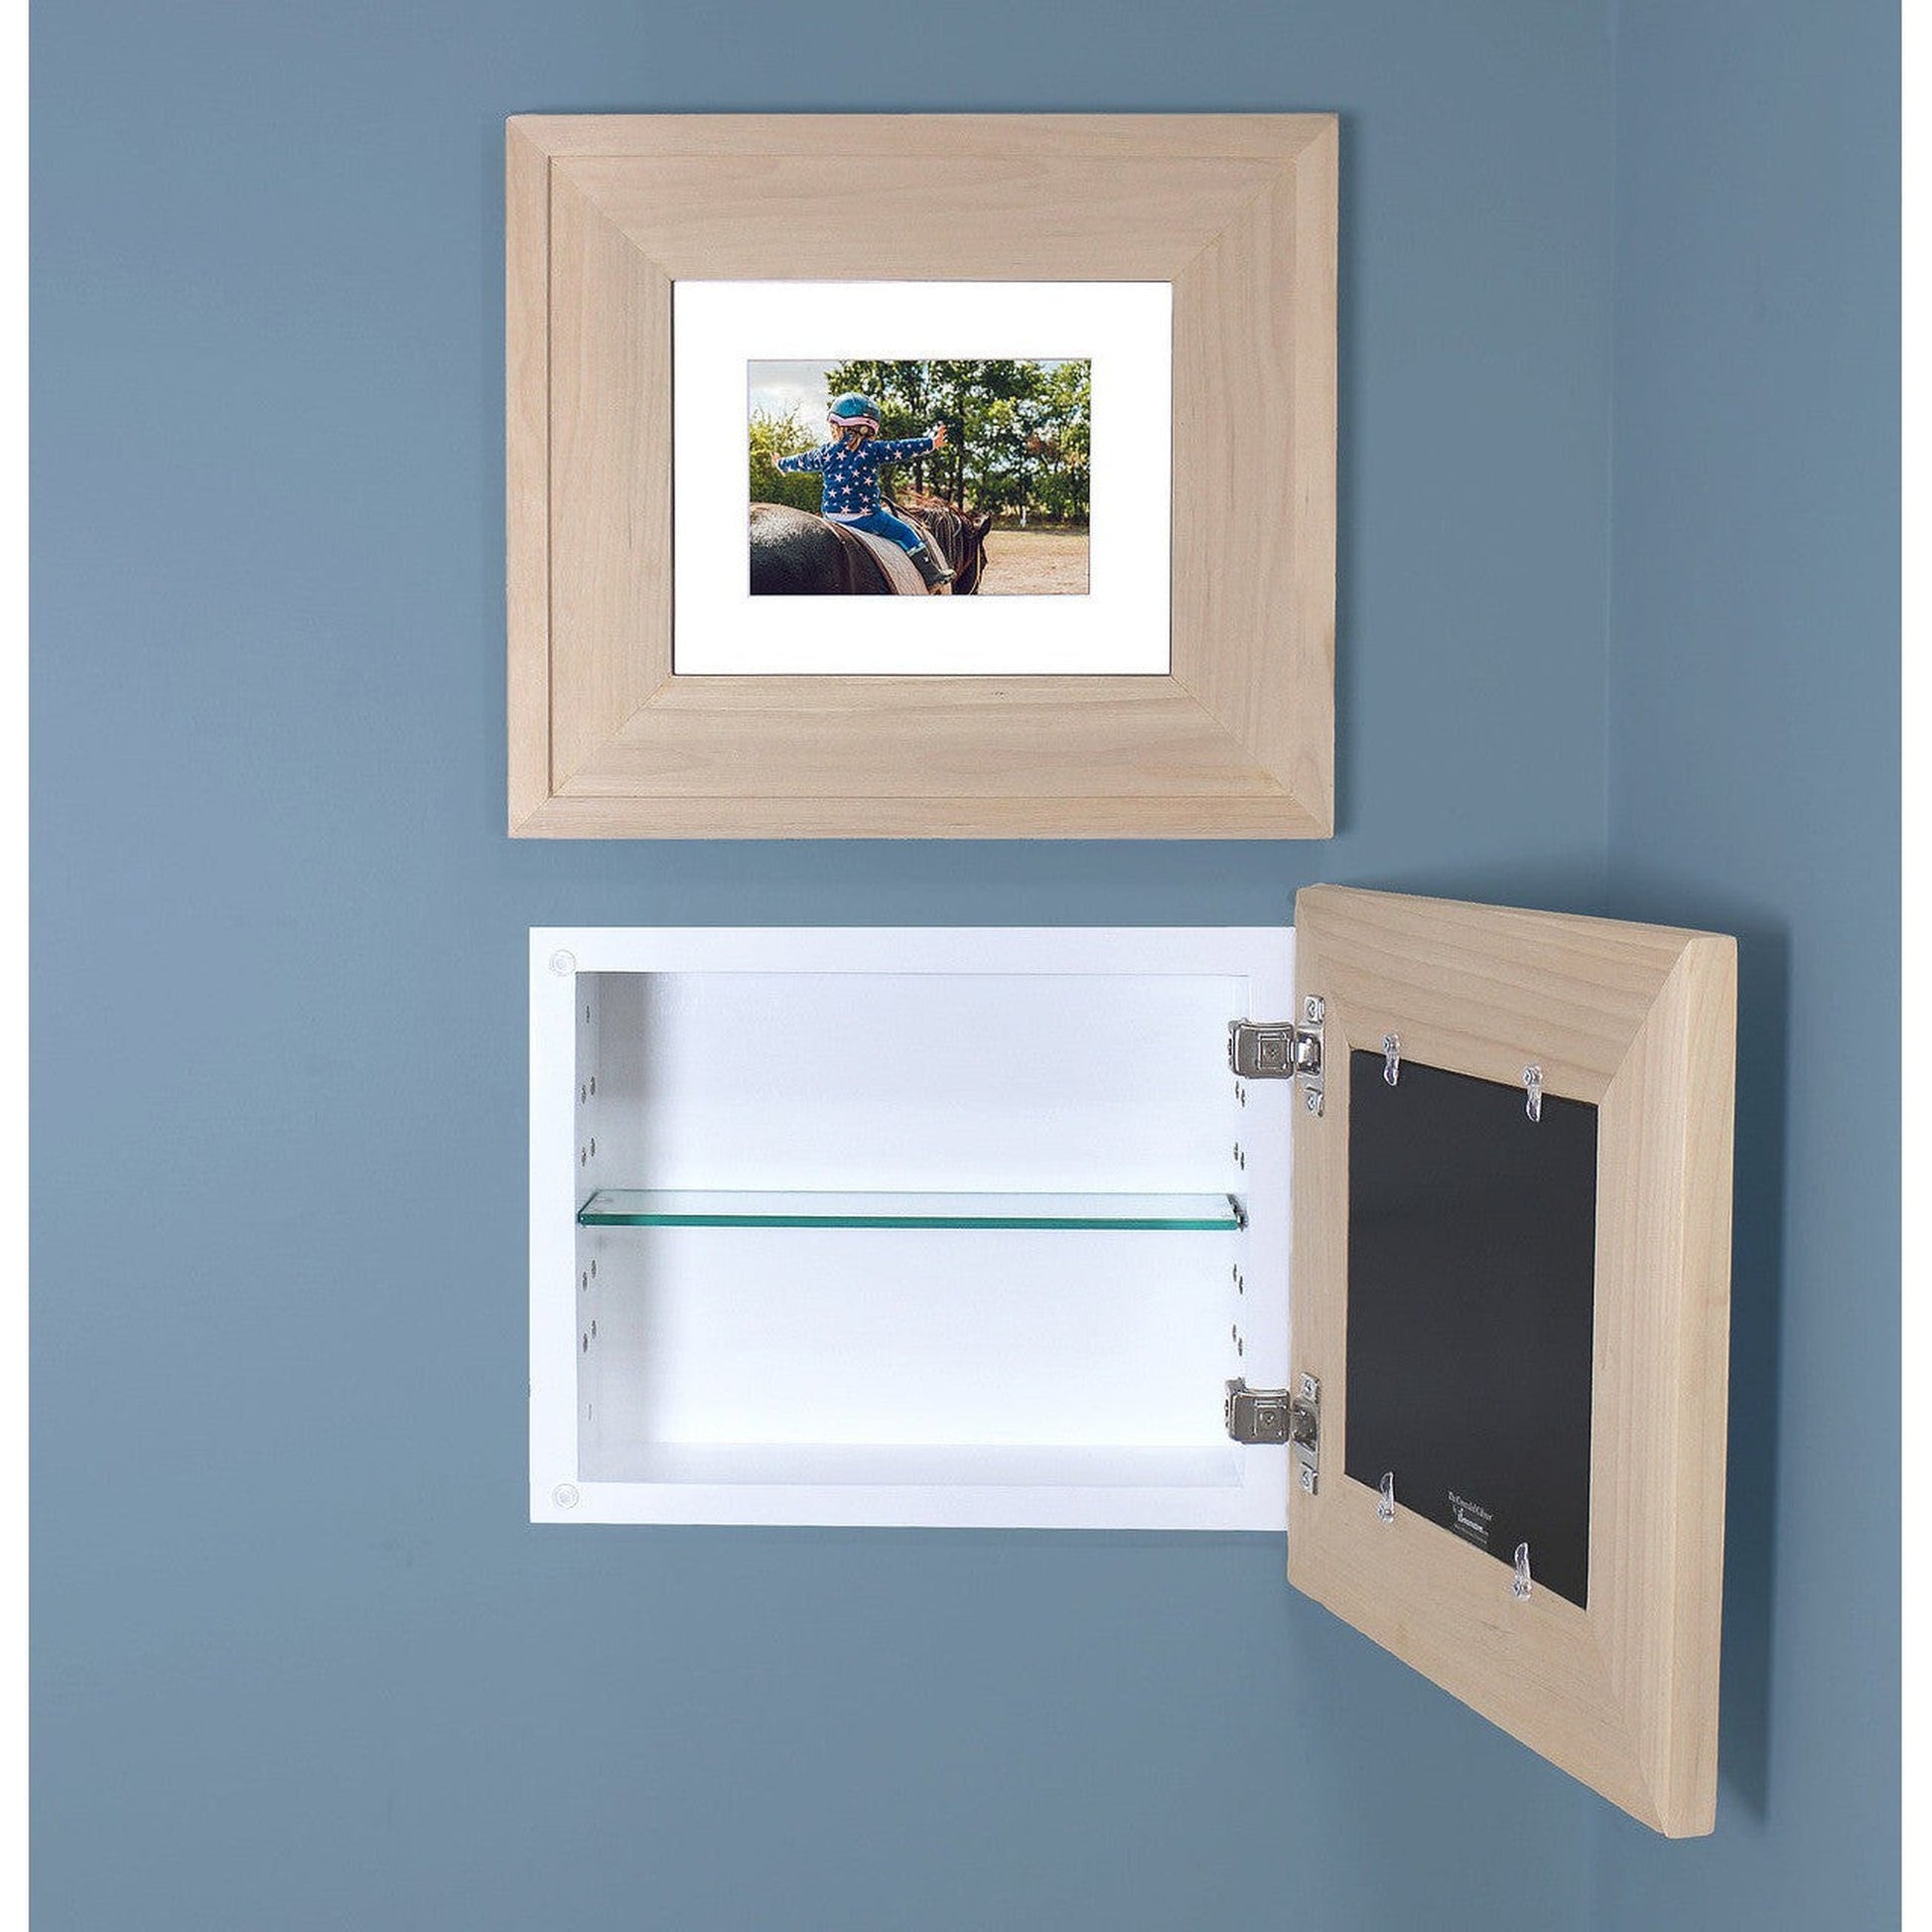 Fox Hollow Furnishings 14" x 11" Unfinished Raised Edge Compact Landscape Special 6" Depth Recessed Picture Frame Medicine Cabinet With Mirror